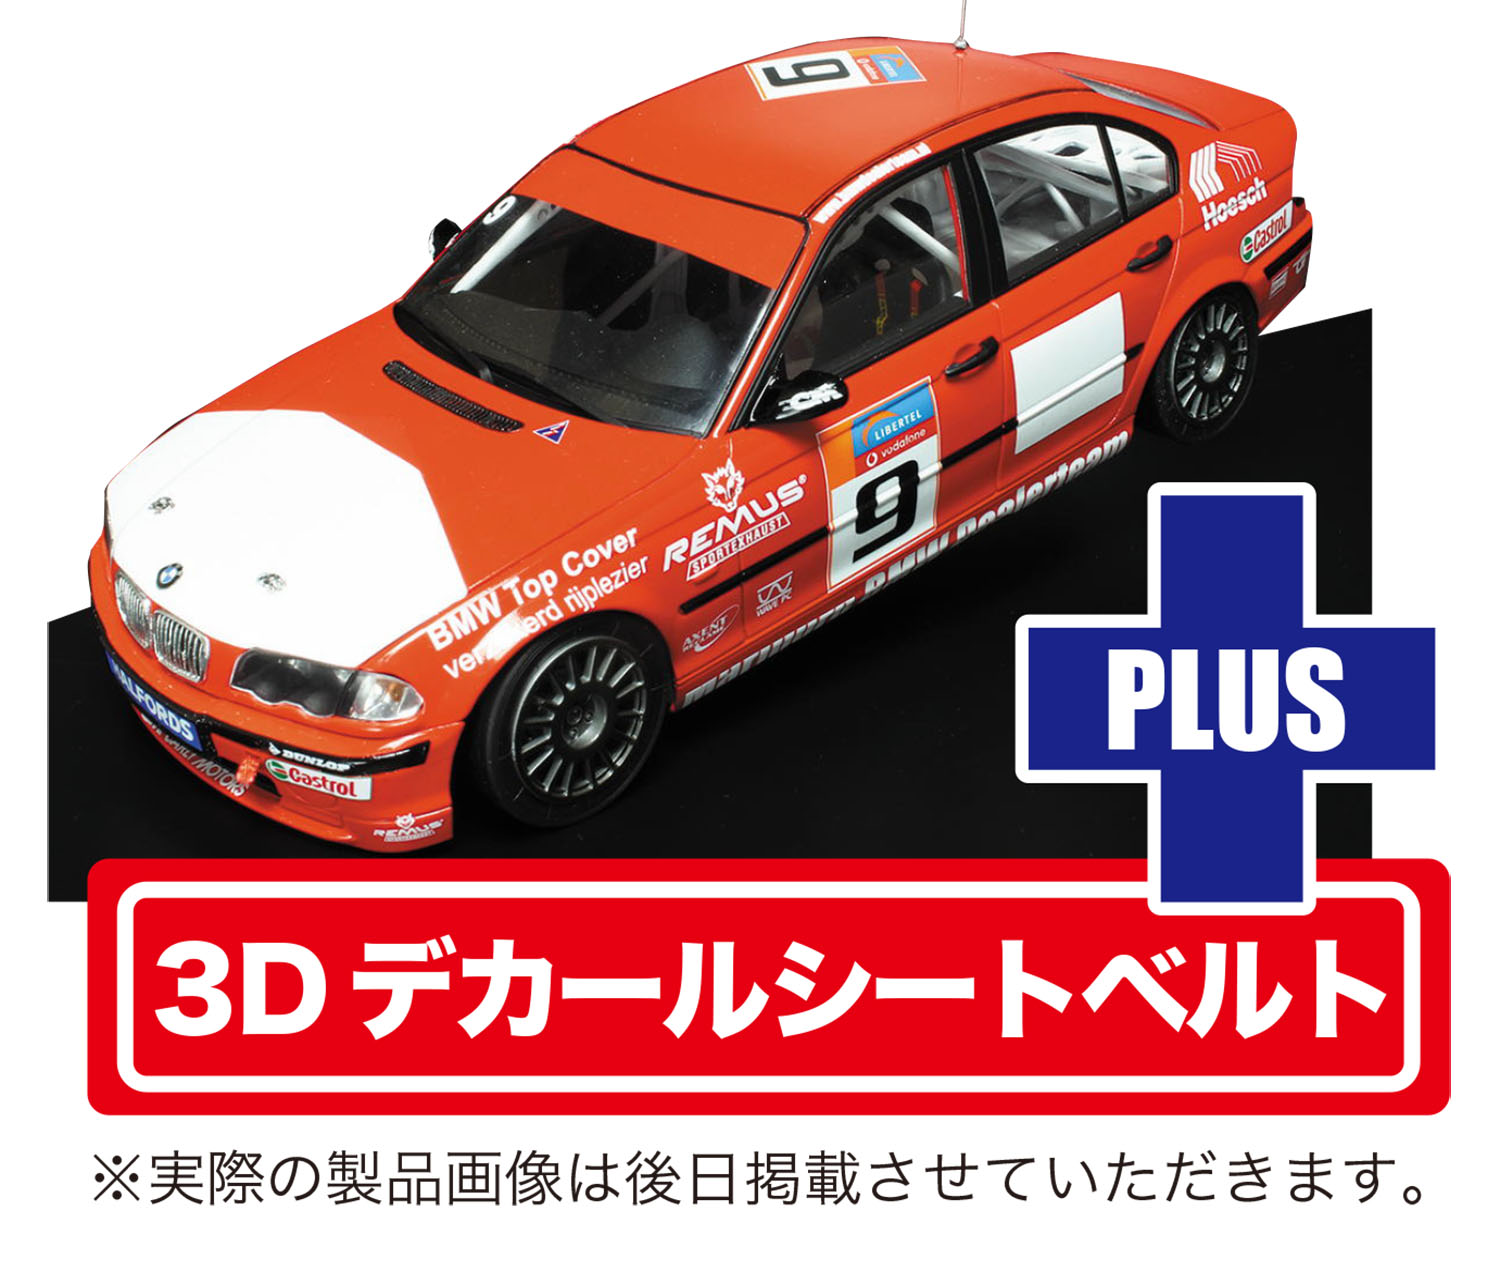 BMW 320i E46 SUPER PRODUCTION DTCC 2001WINNER Set with 3D Decal